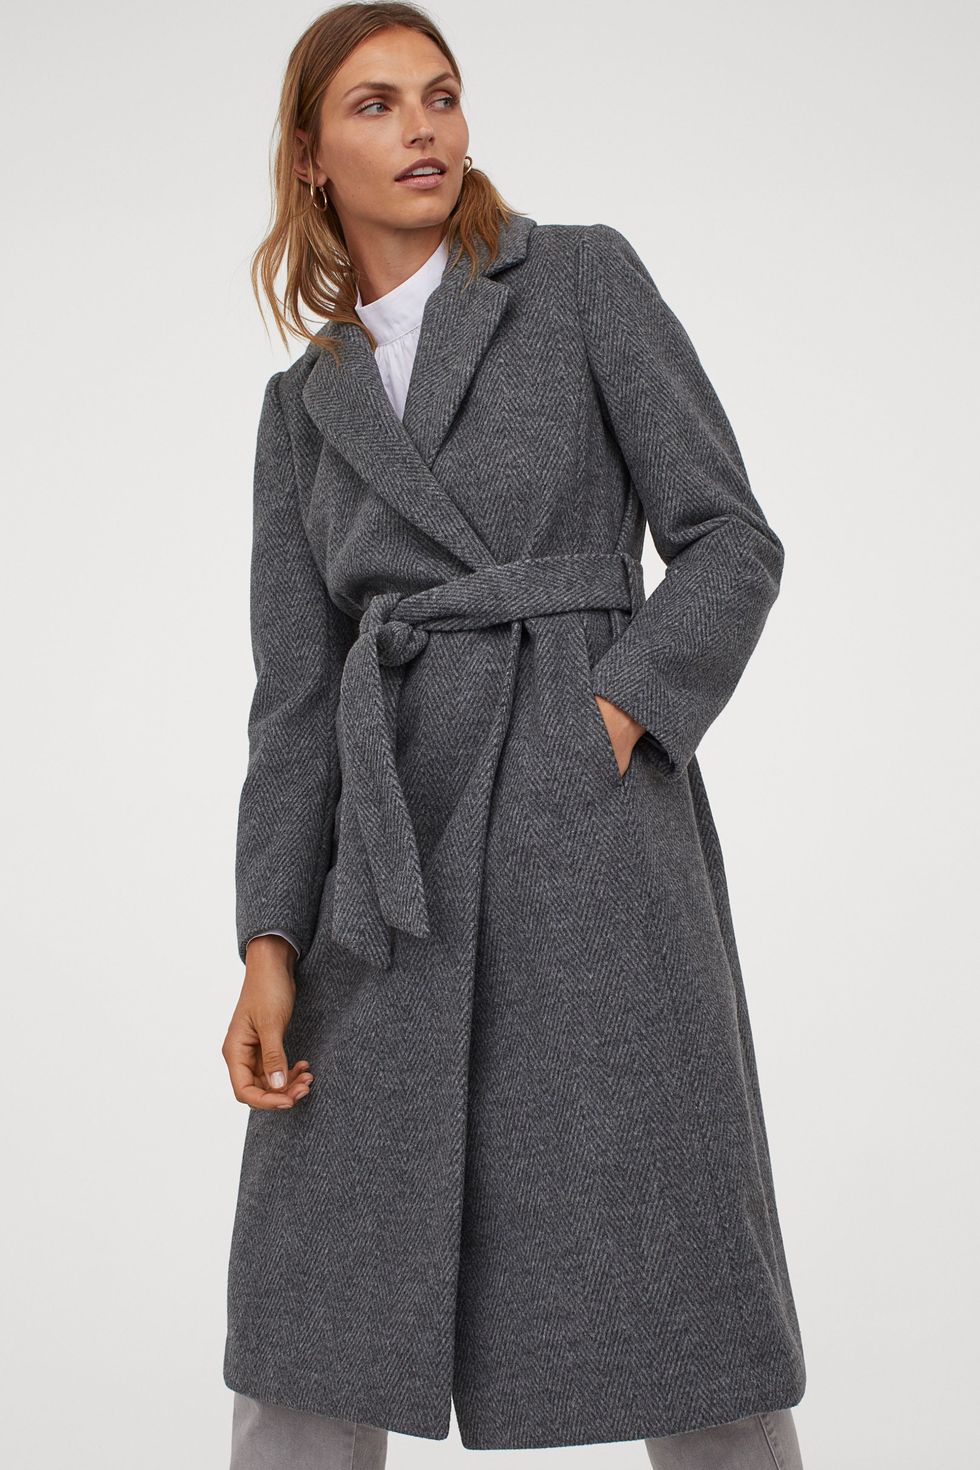 The Marks & Spencer coat that's perfect for autumn